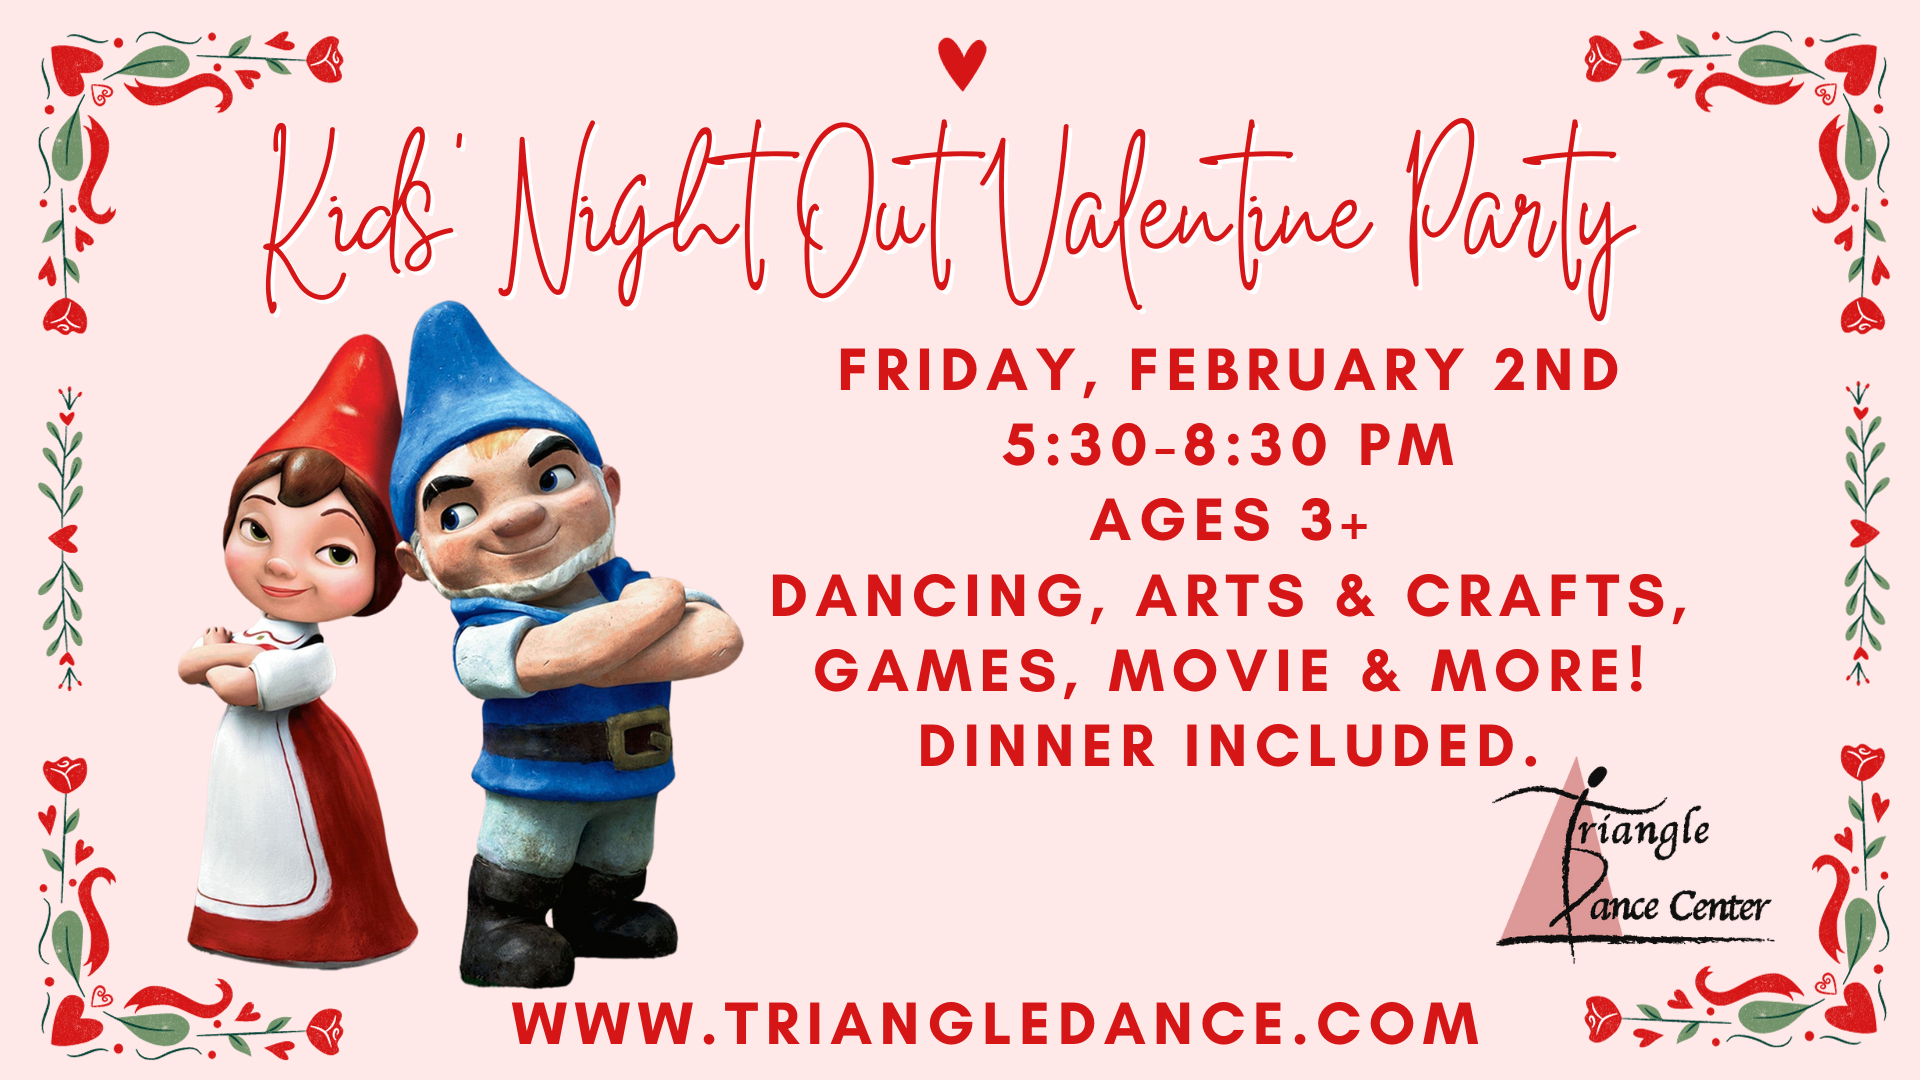 Kids Night Out Valentines Party